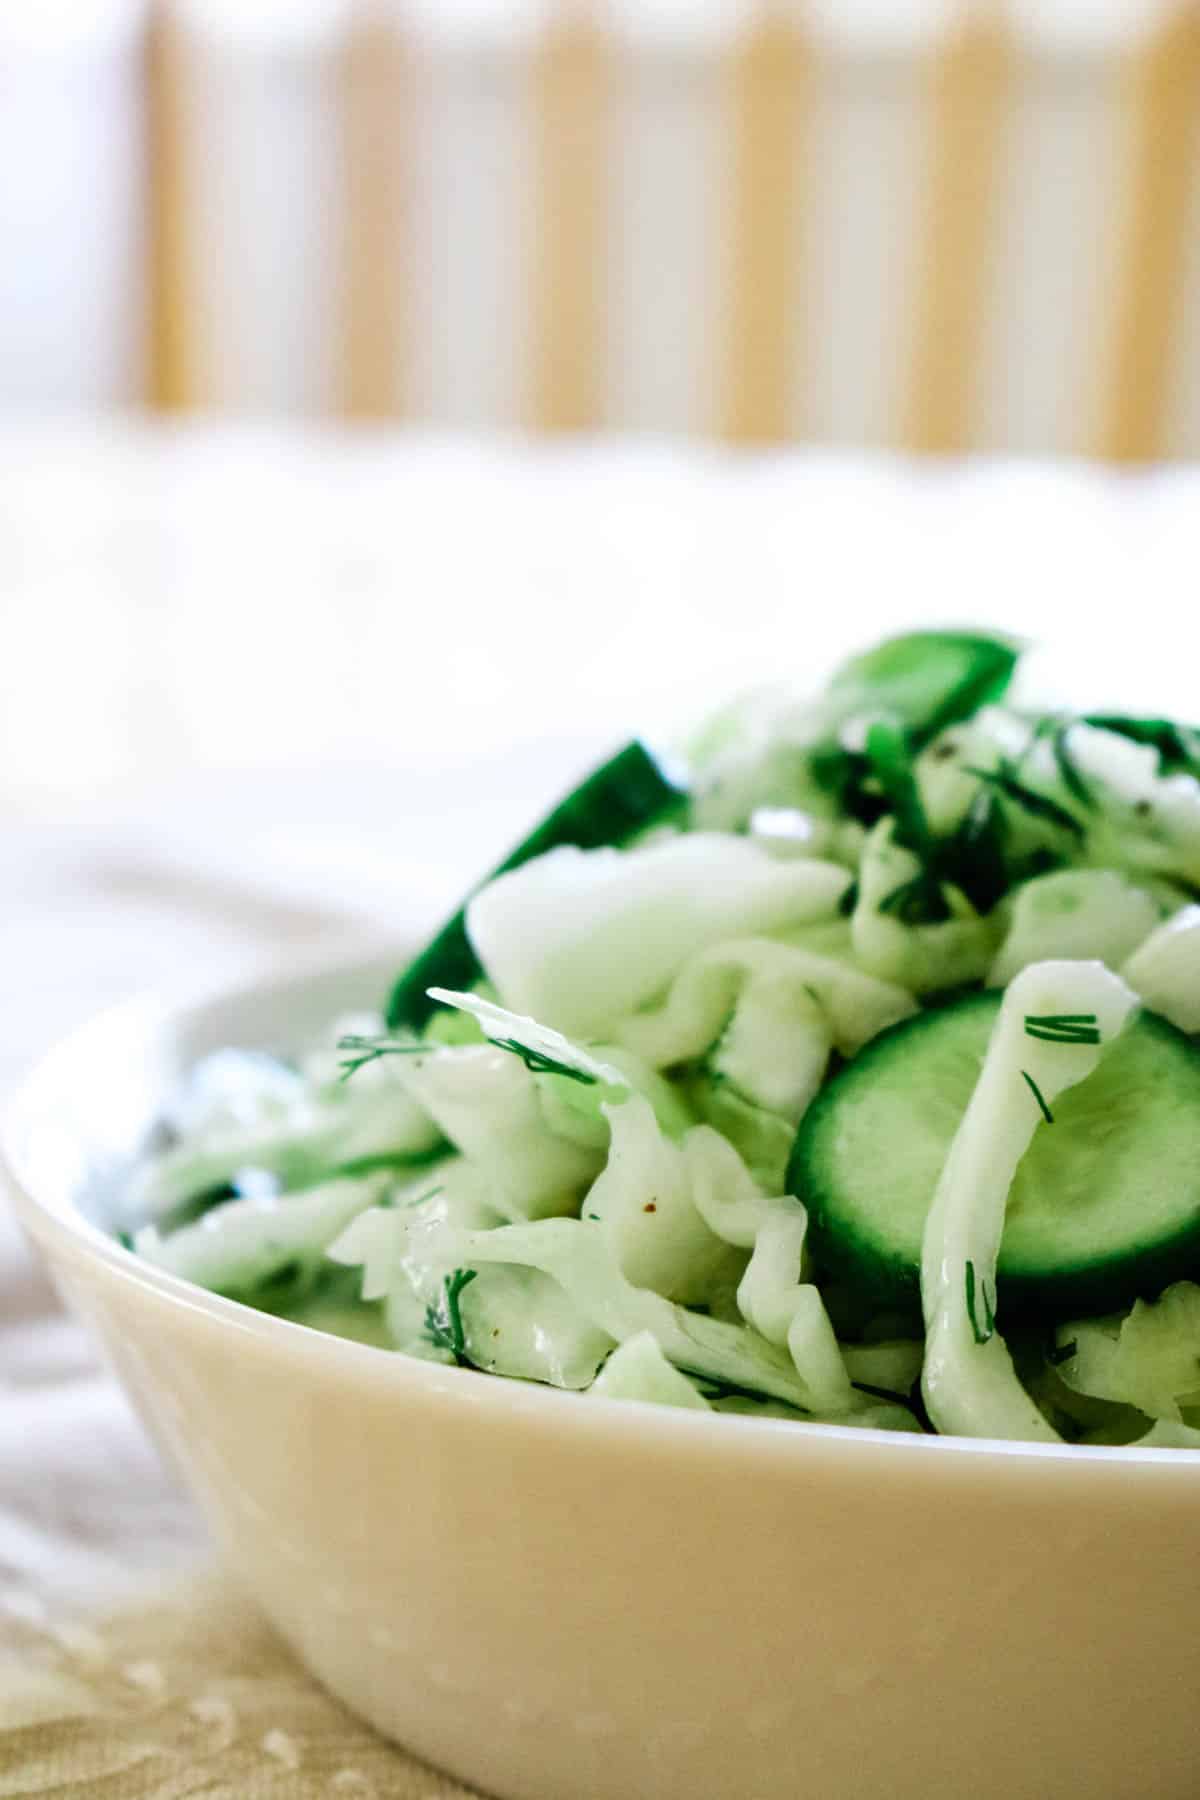 Sliced cucumbers, shredded cabbage in a white bowl